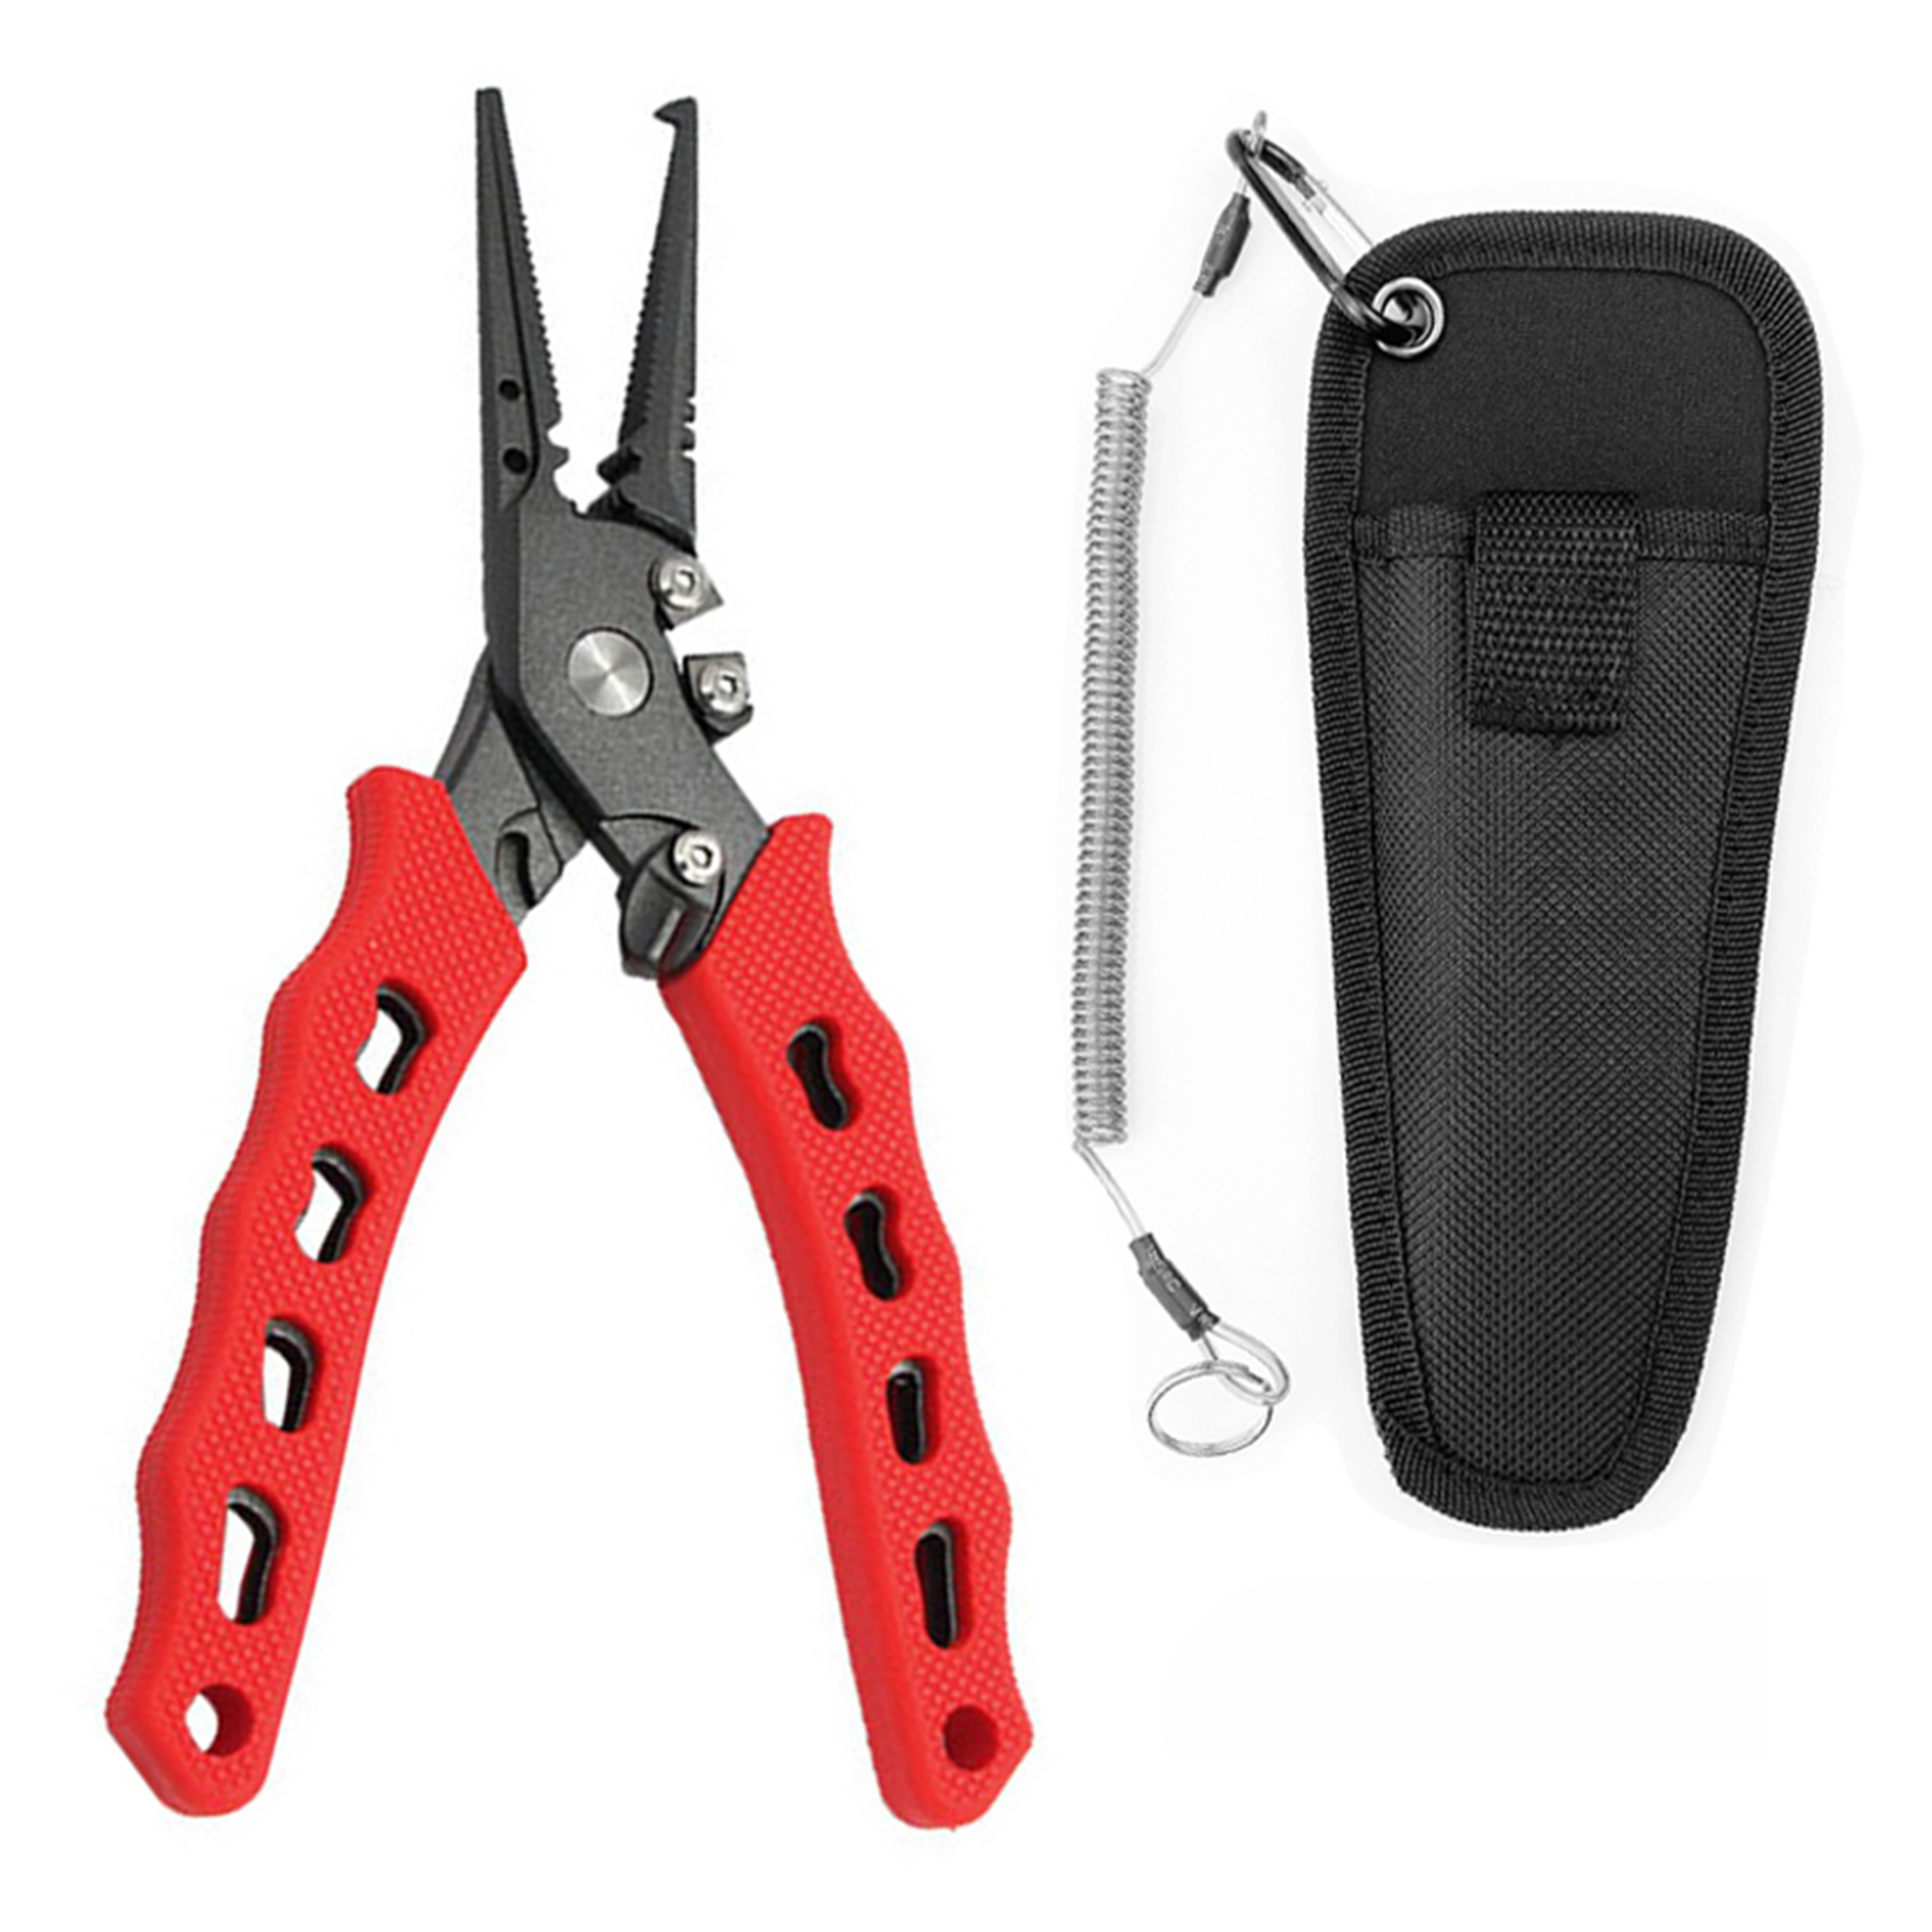 Piscifun Fishing Pliers, Aluminum Hook Remover Pliers with Braid Cutters,  Split Ring, Fish Holder with Sheath and Lanyard